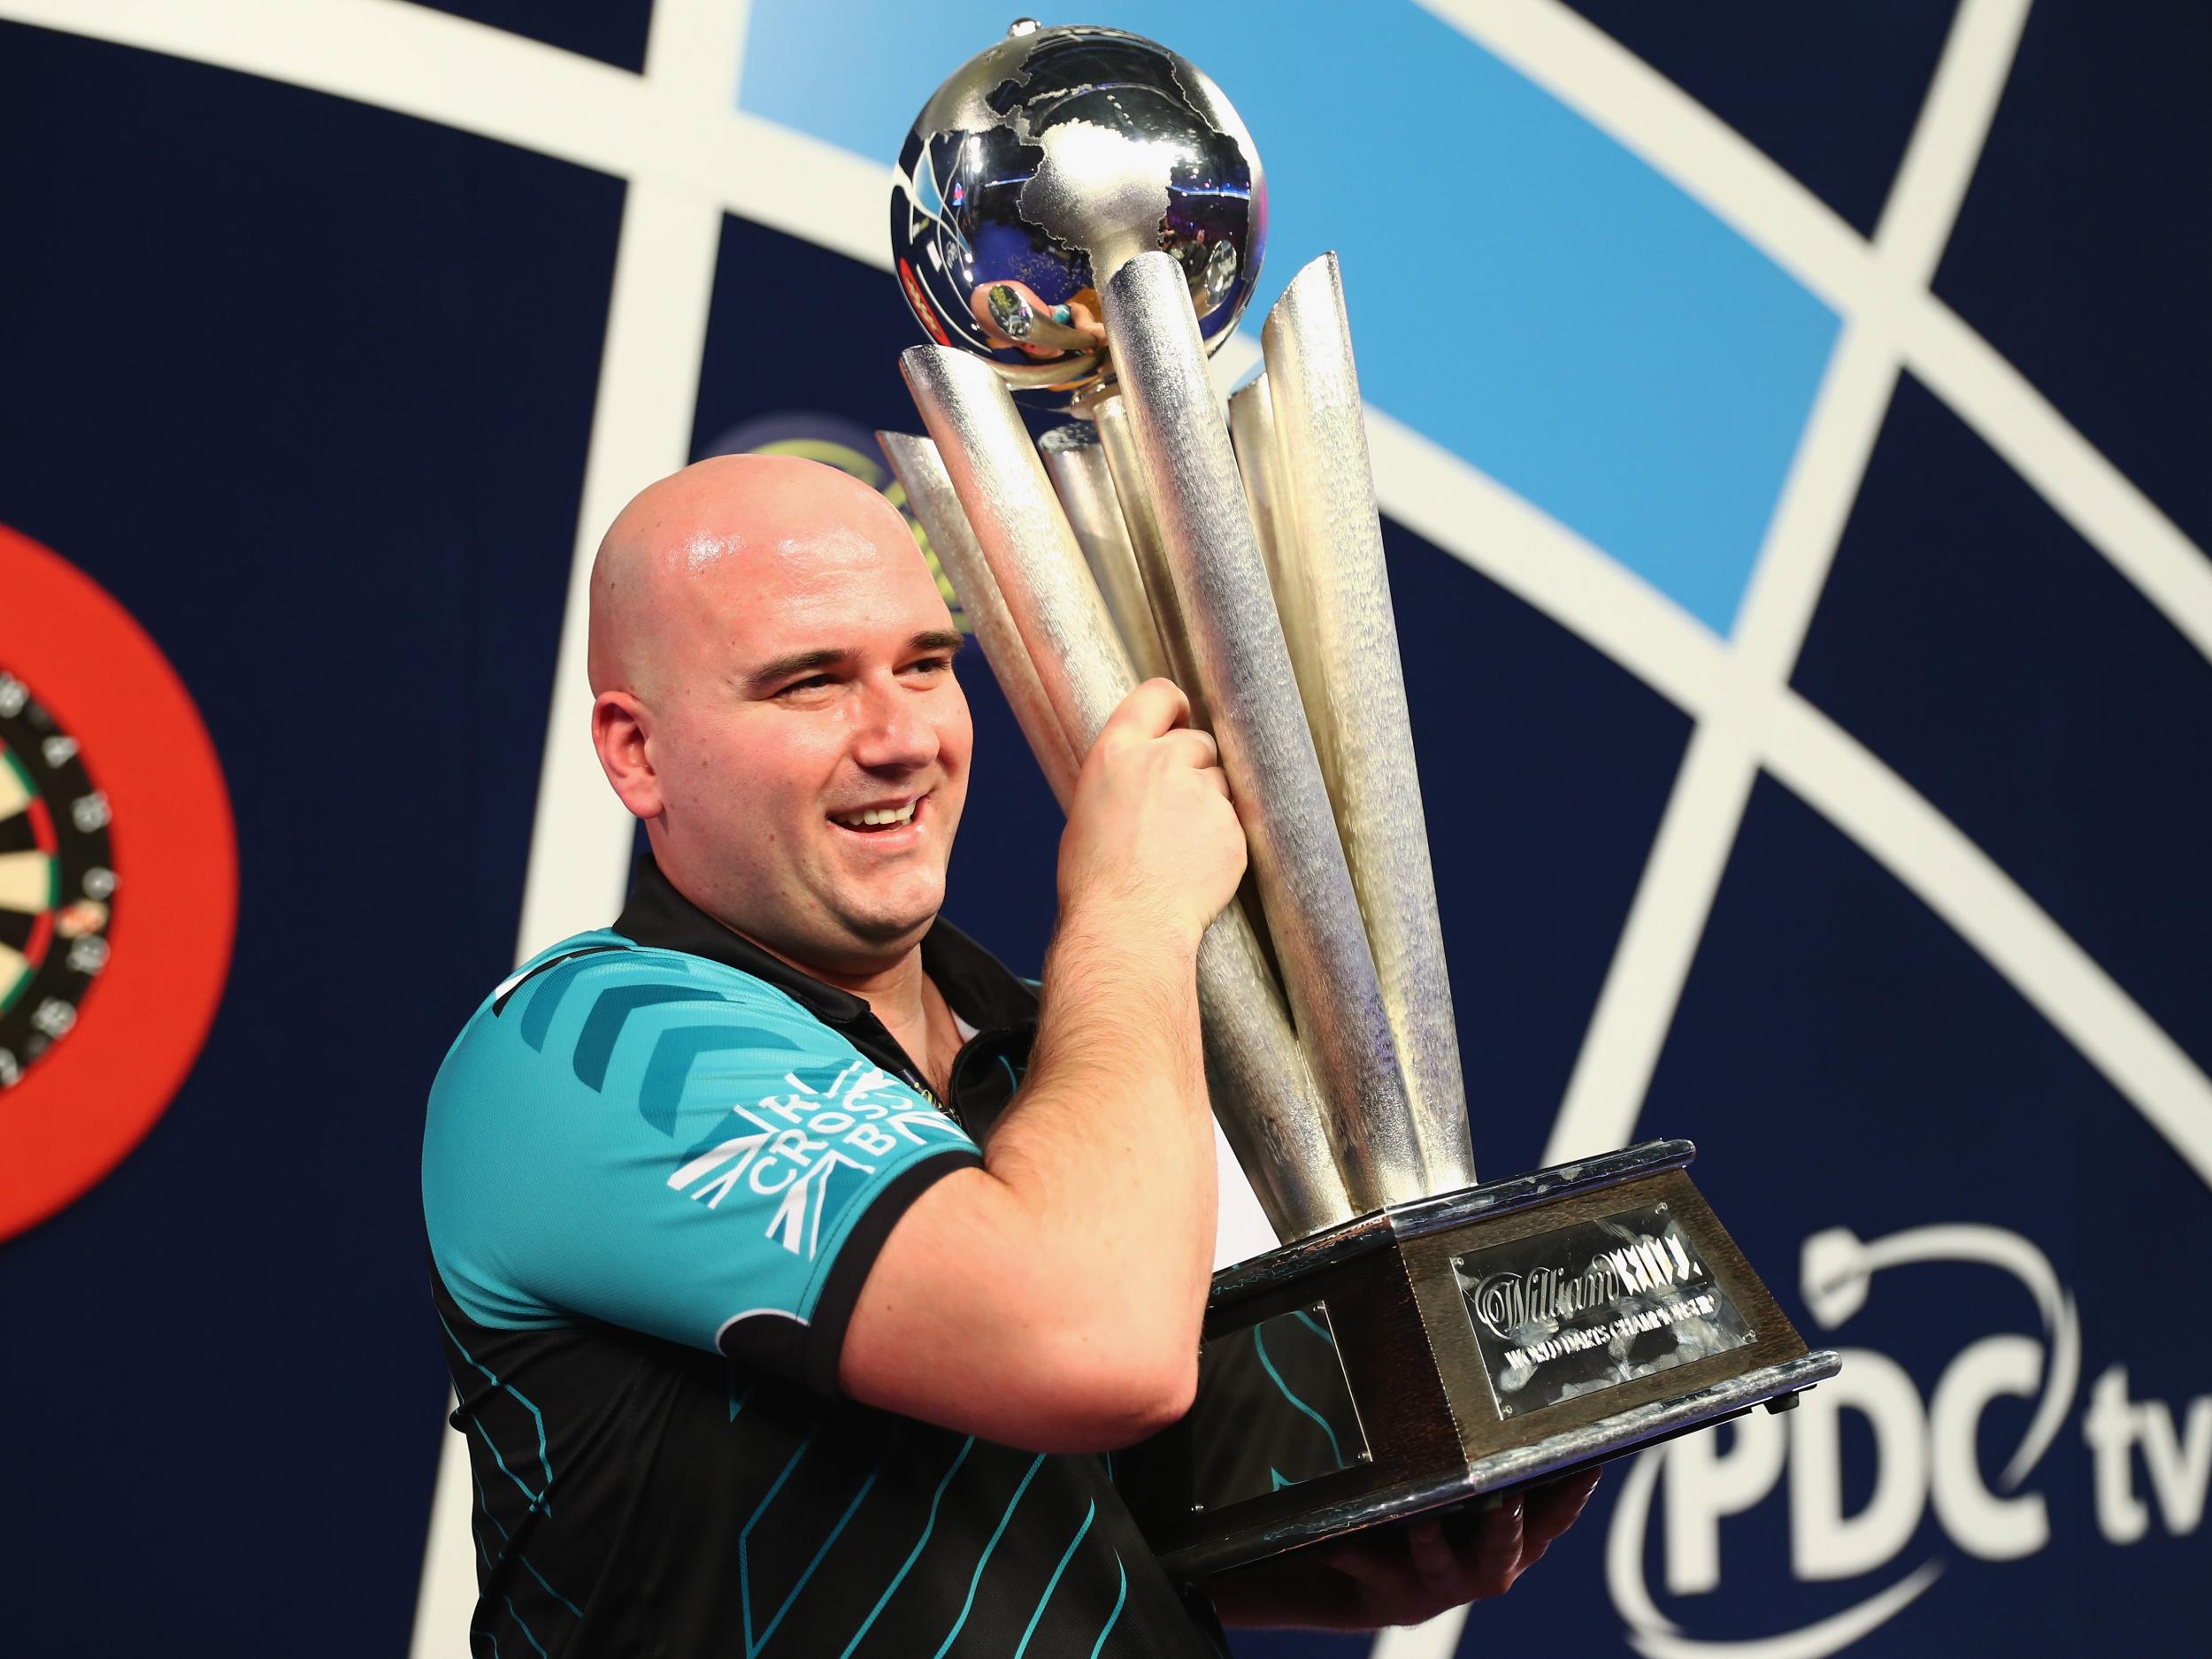 Rob Cross was the surprise winner in 2017